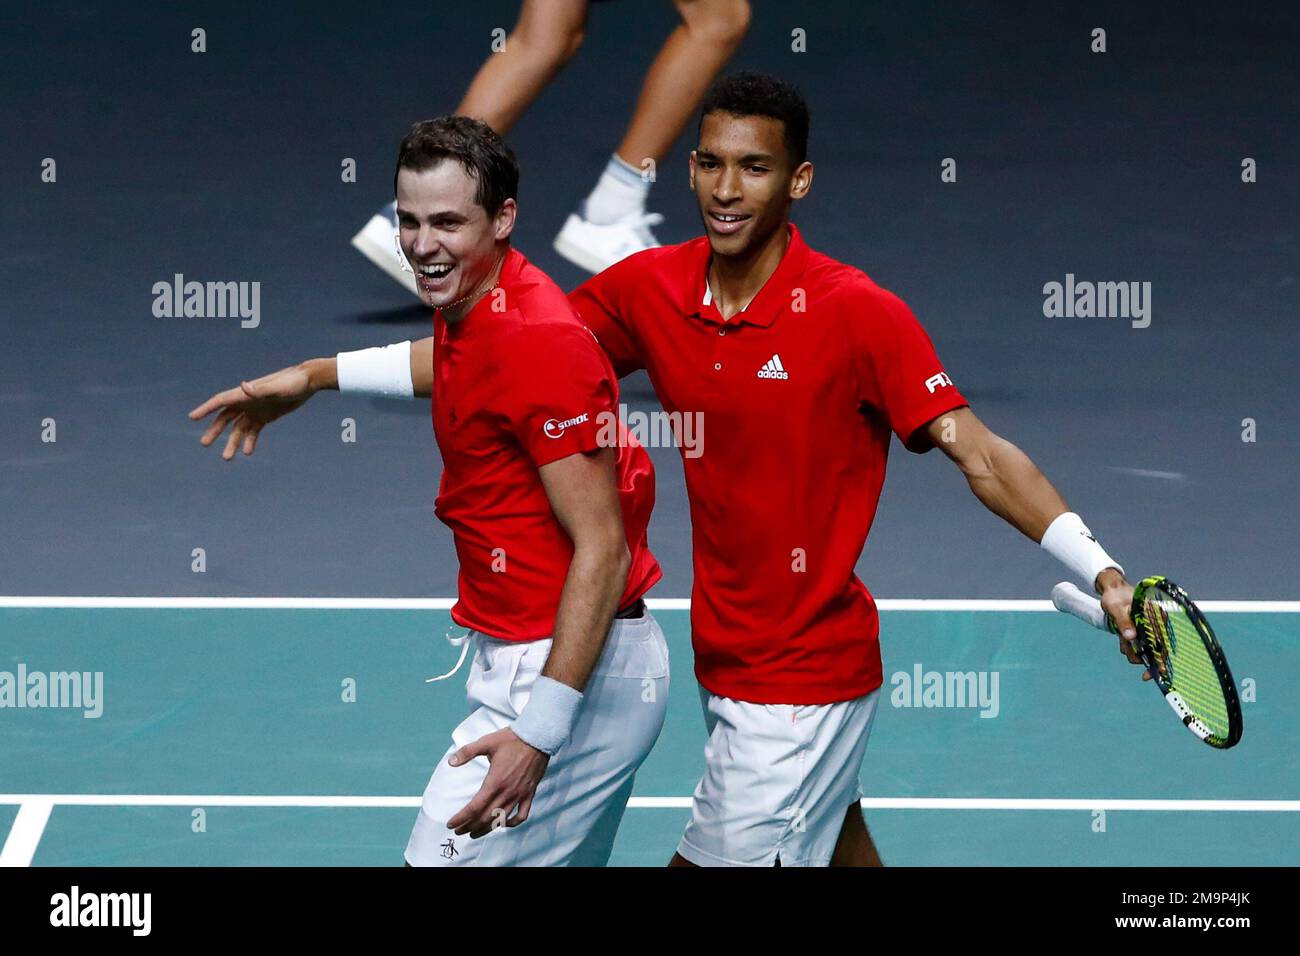 Canada's Vasek Pospisil, left, and Felix Auger Aliassime celebrate after  defeating Italy's Matteo Berrettini and Fabio Fognini during the semi-final  Davis Cup tennis doubles match between Italy and Canada in Malaga, Spain,